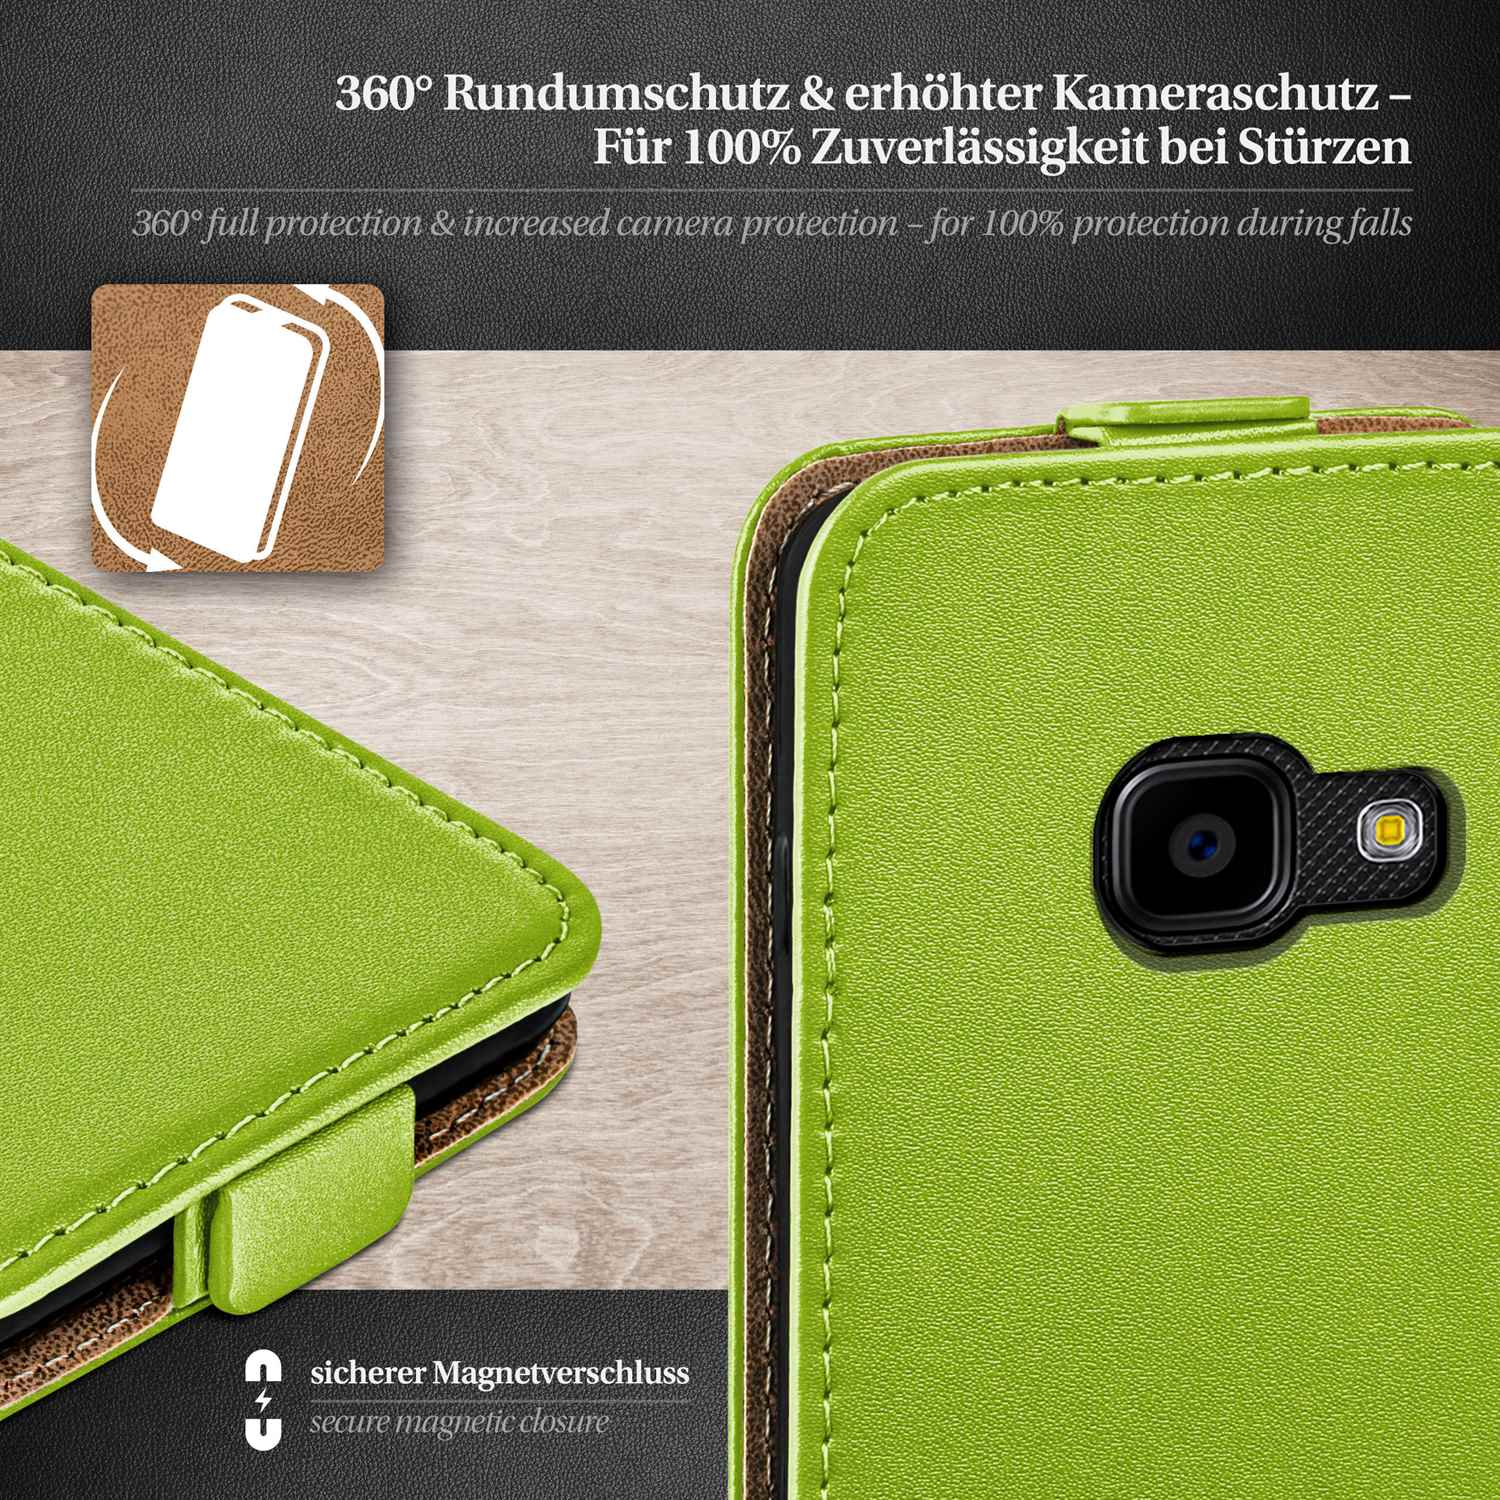 MOEX Flip Case, Flip Cover, 4, Galaxy Samsung, Xcover Lime-Green